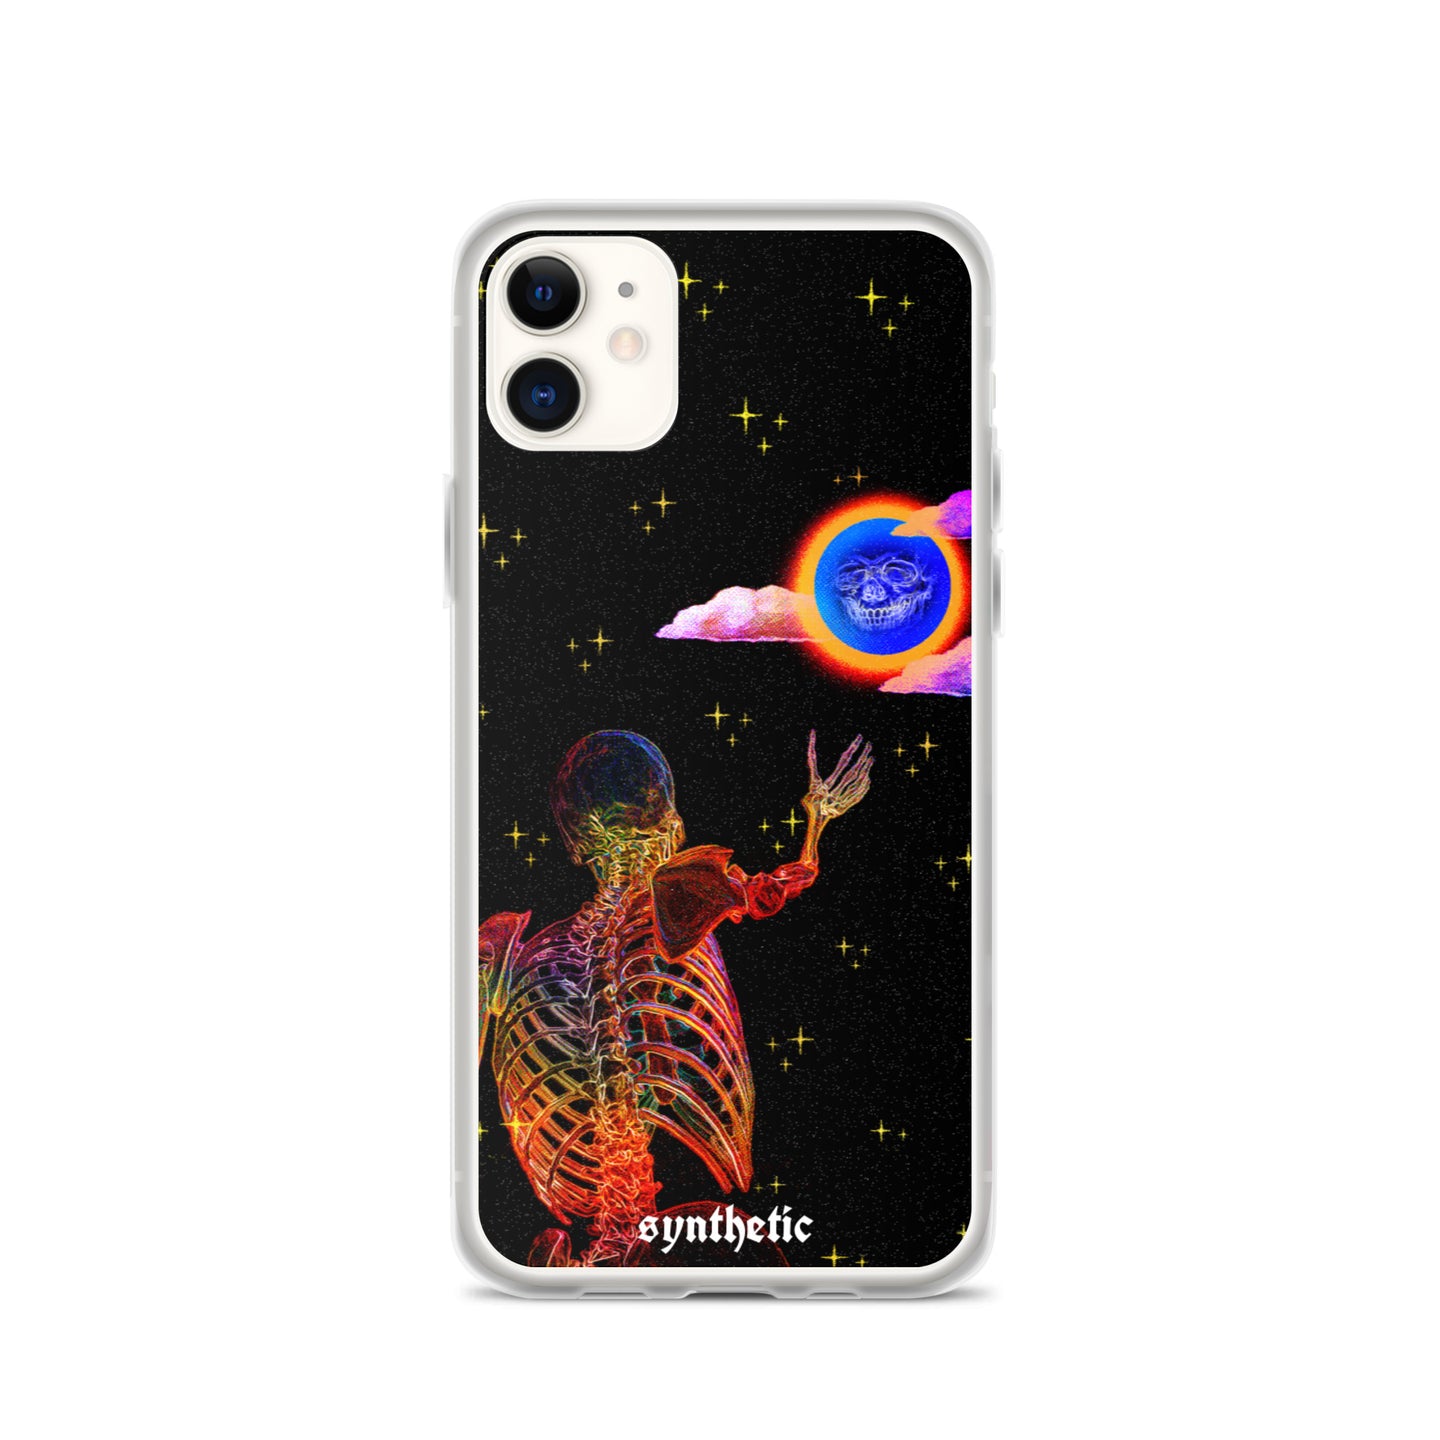 'i still feel you here with me' iphone case